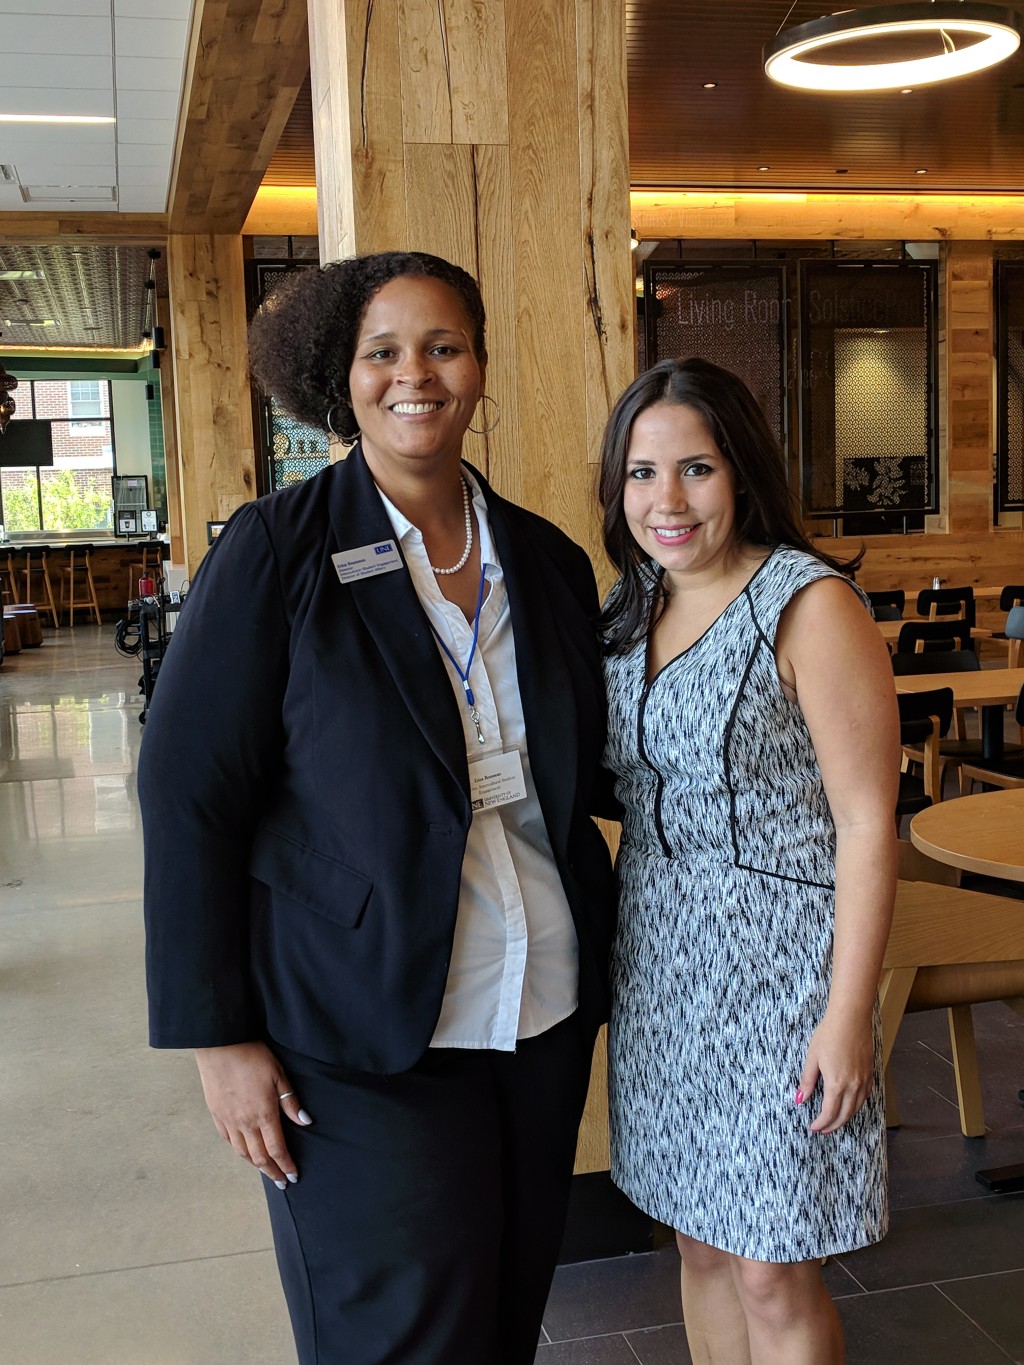 Erica Rousseau, director of Intercultural Student Engagement and organizer of the event, poses with Constanza Cabello, assistant